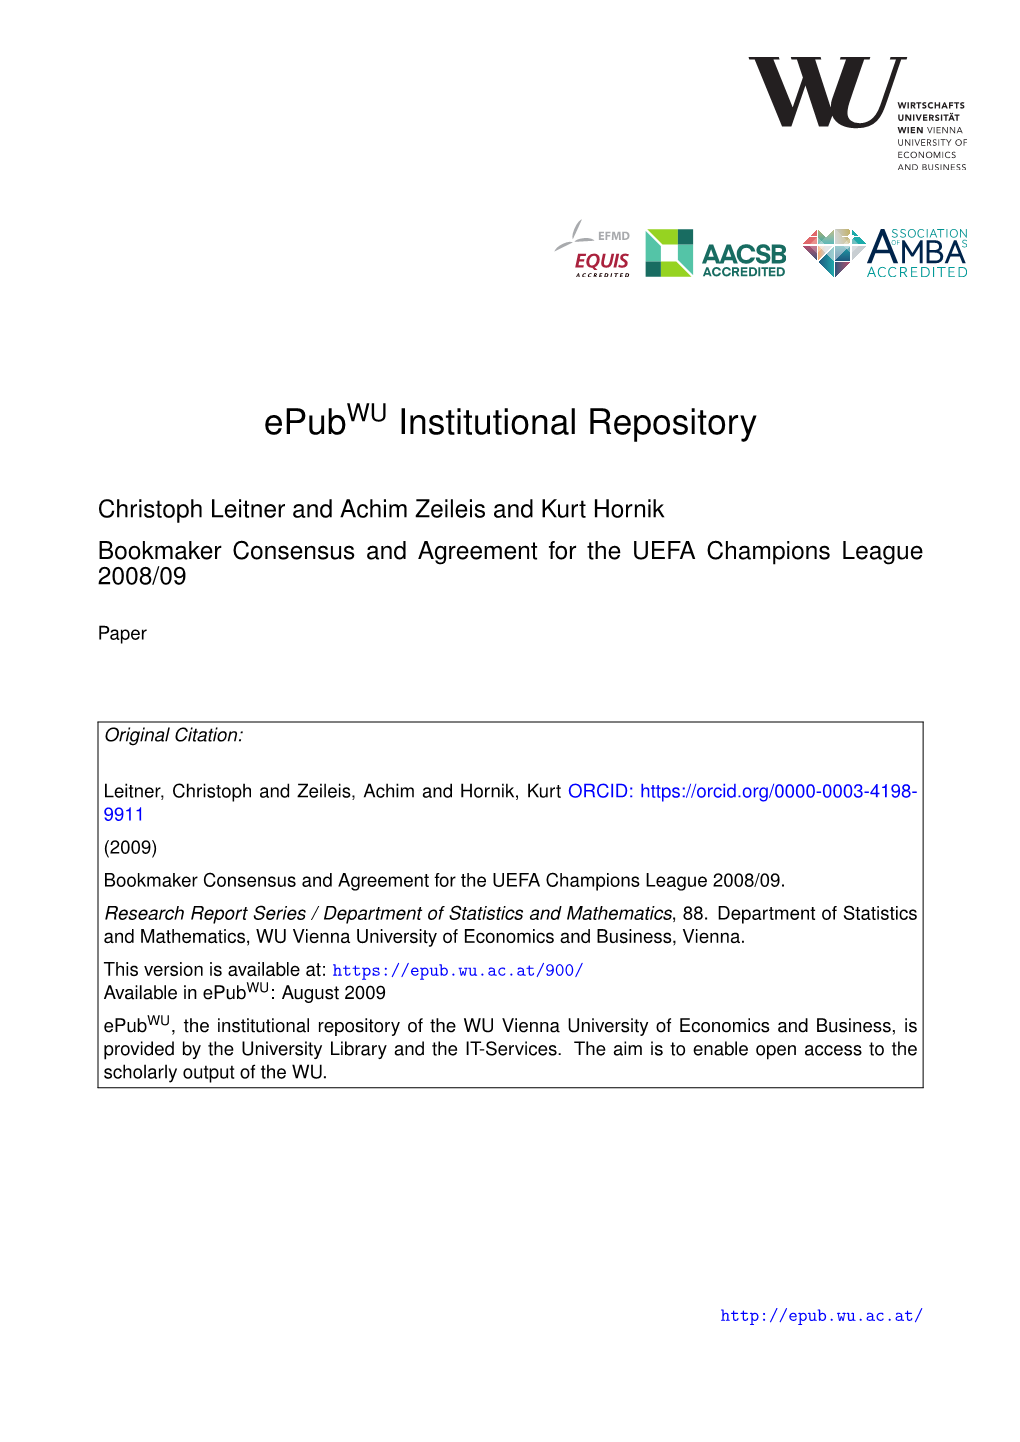 Bookmaker Consensus and Agreement for the UEFA Champions League 2008/09